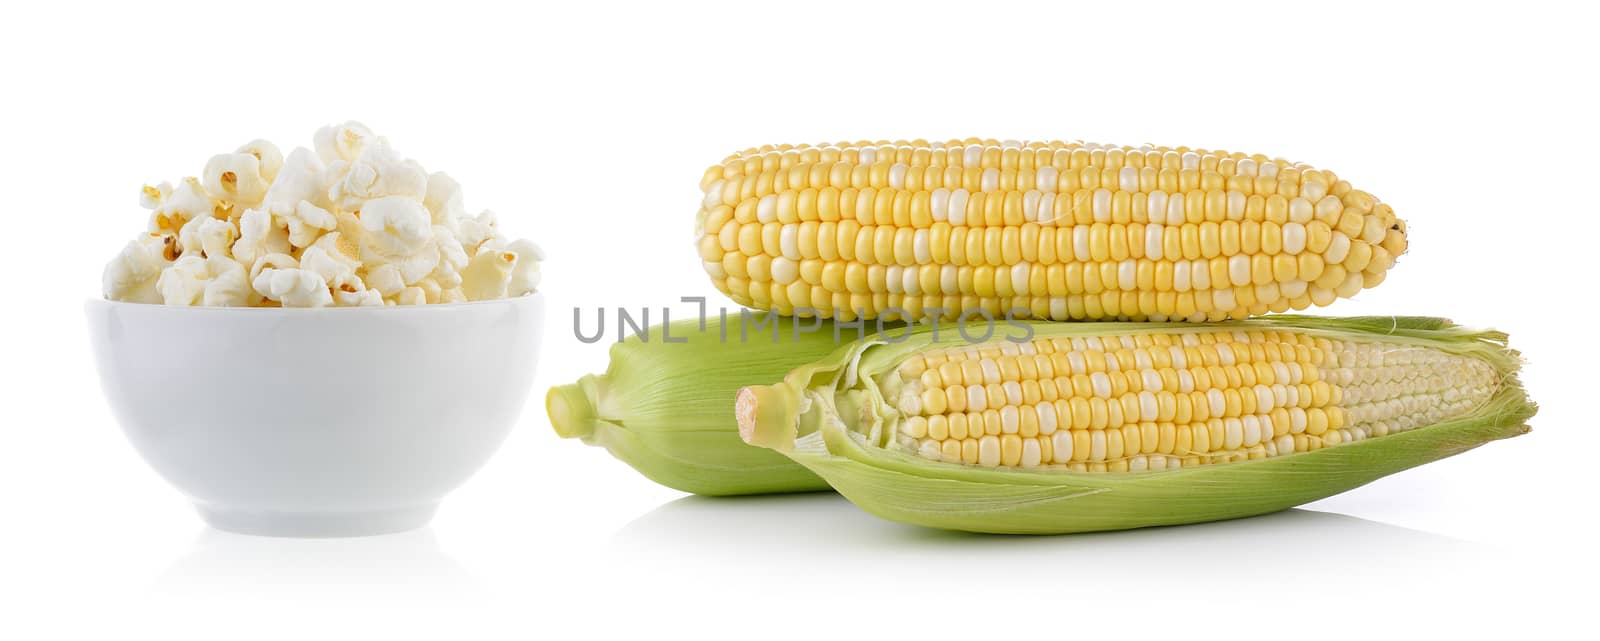 popcorn in bowl and corn isolated on white background